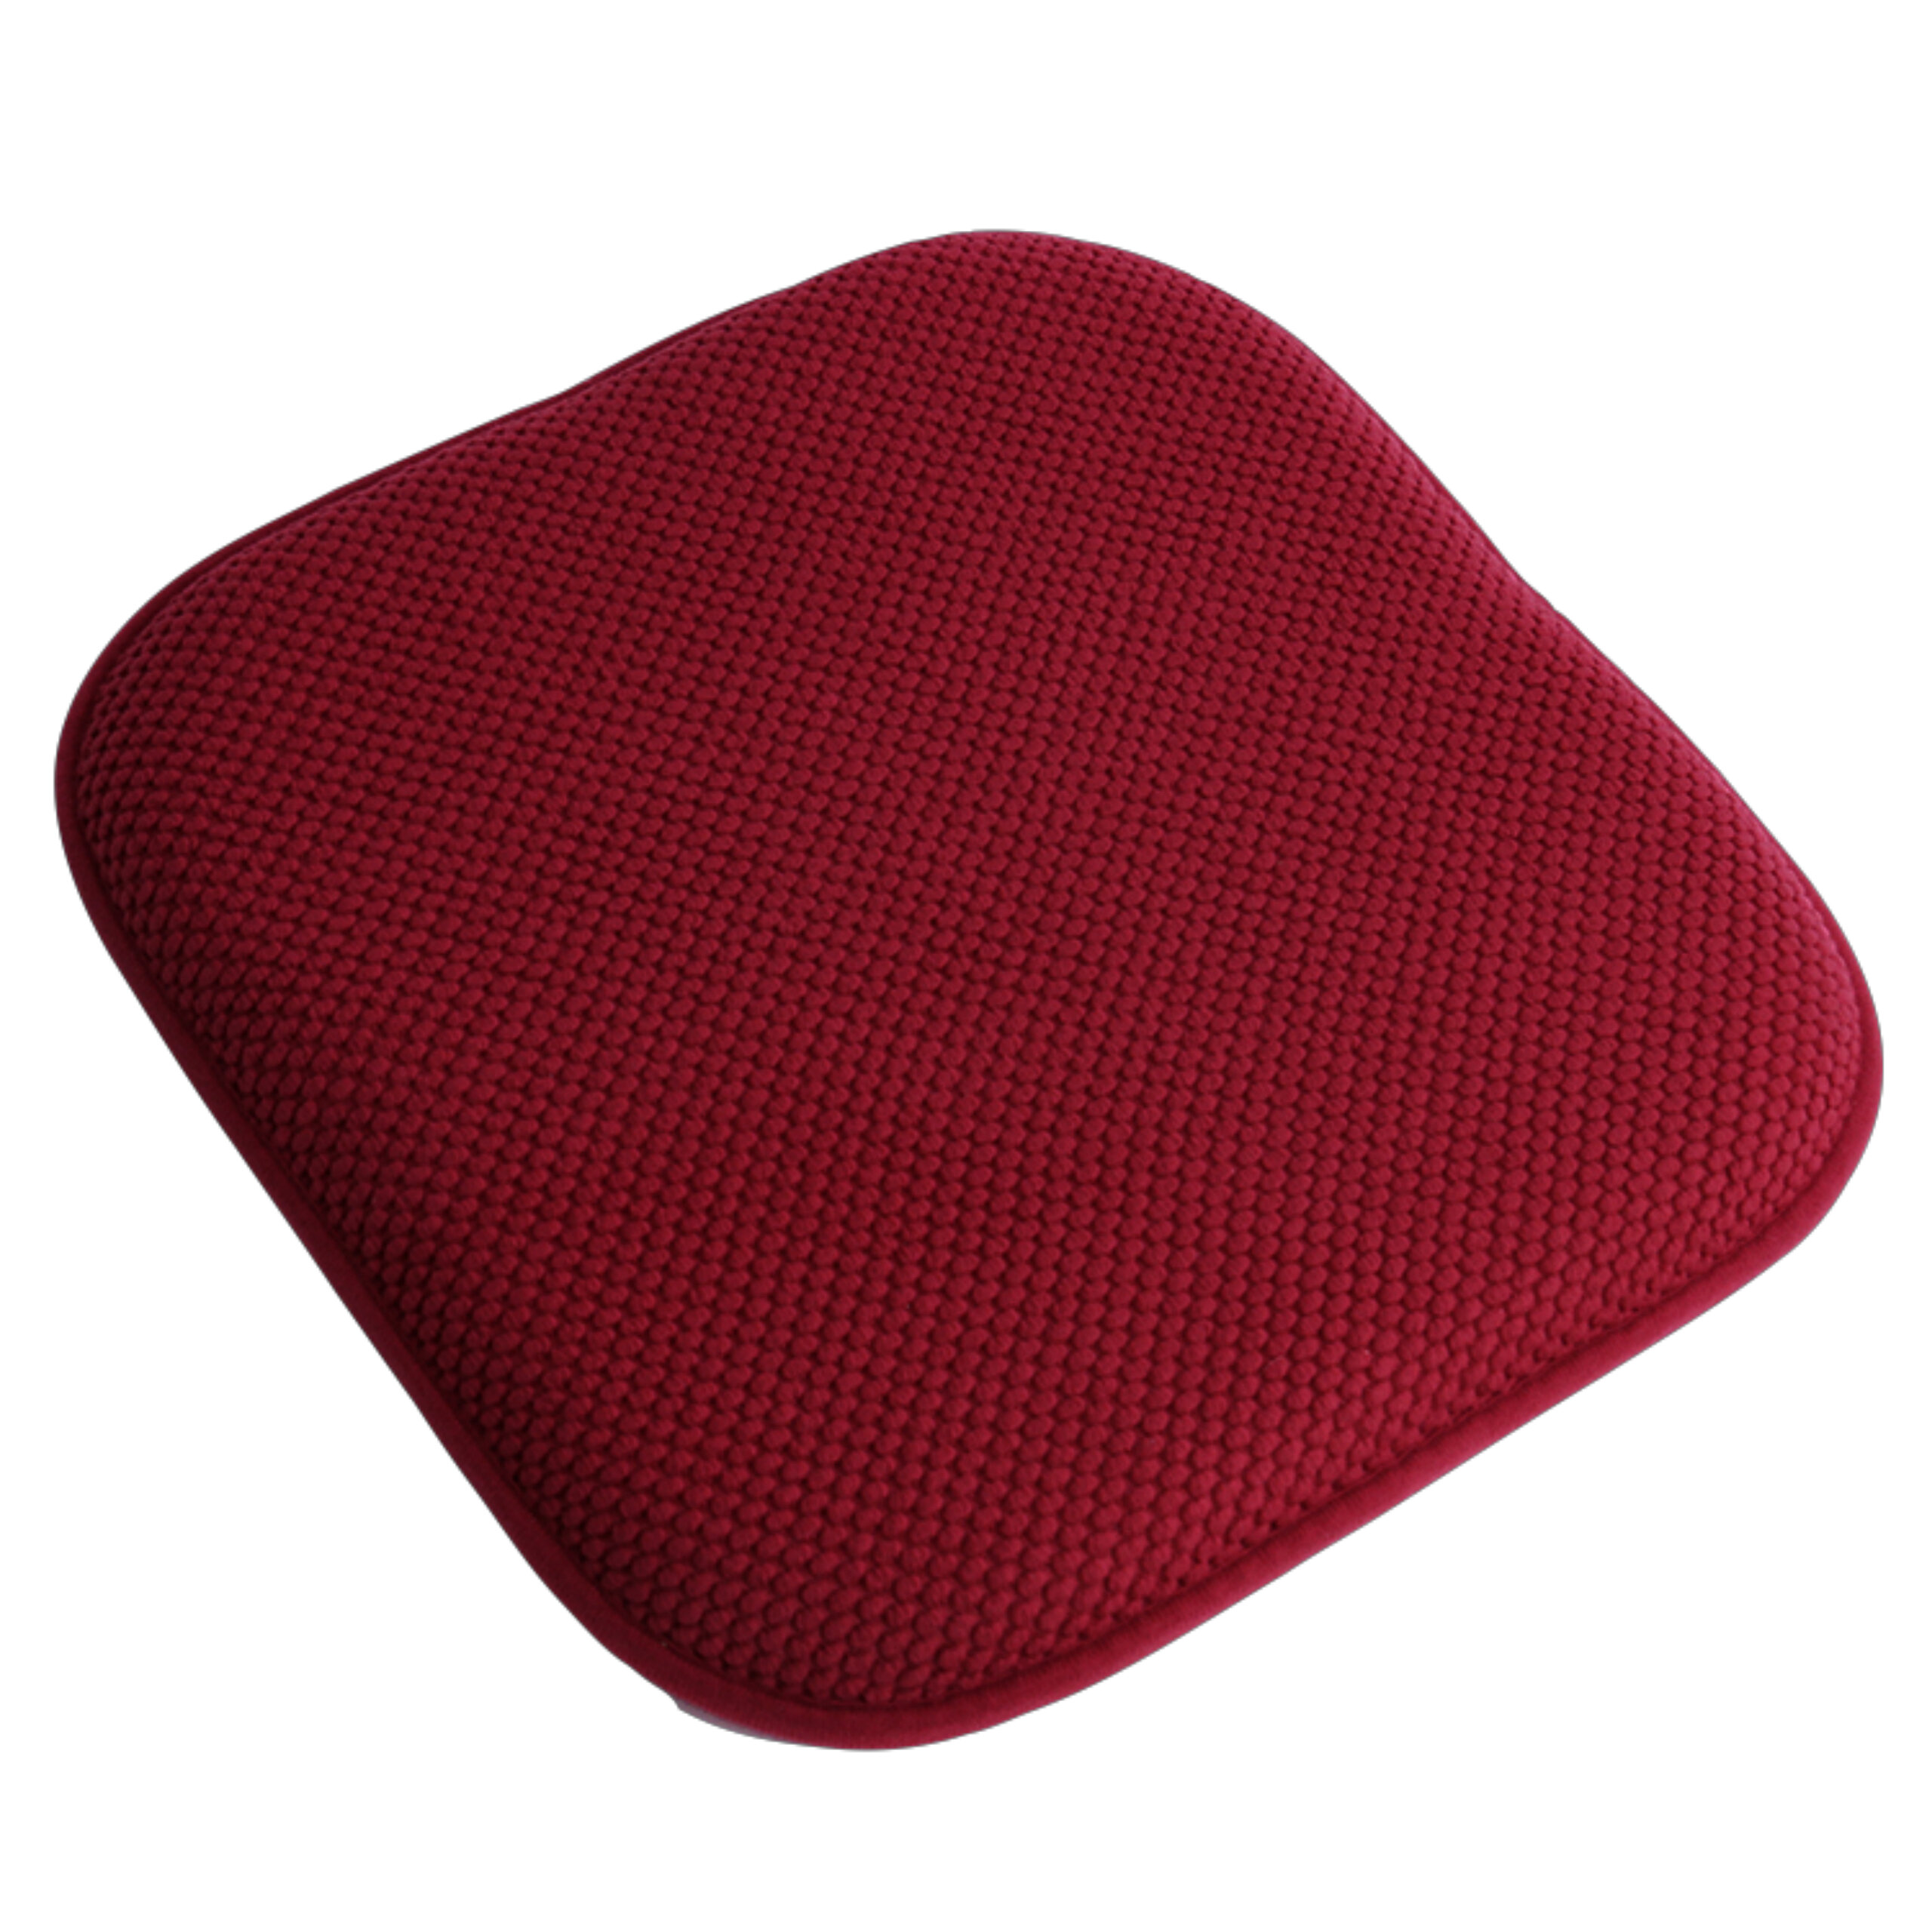 Premium Memory Foam Non-Slip Ultra Soft Chenille Surface Chair Pad Cushions  - Assorted Colors 